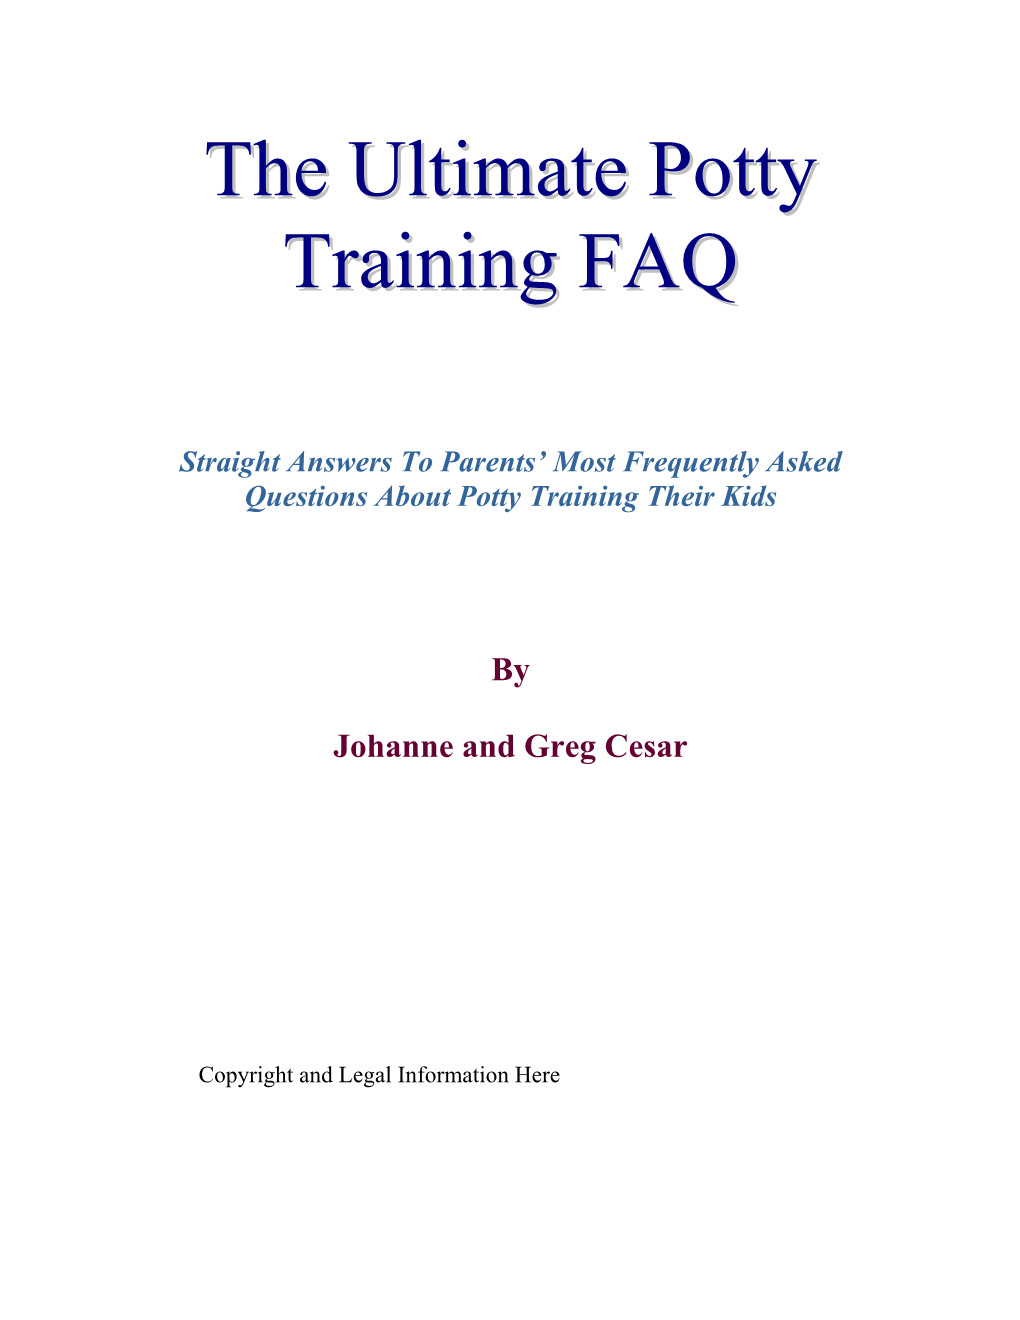 The Ultimate Potty Training